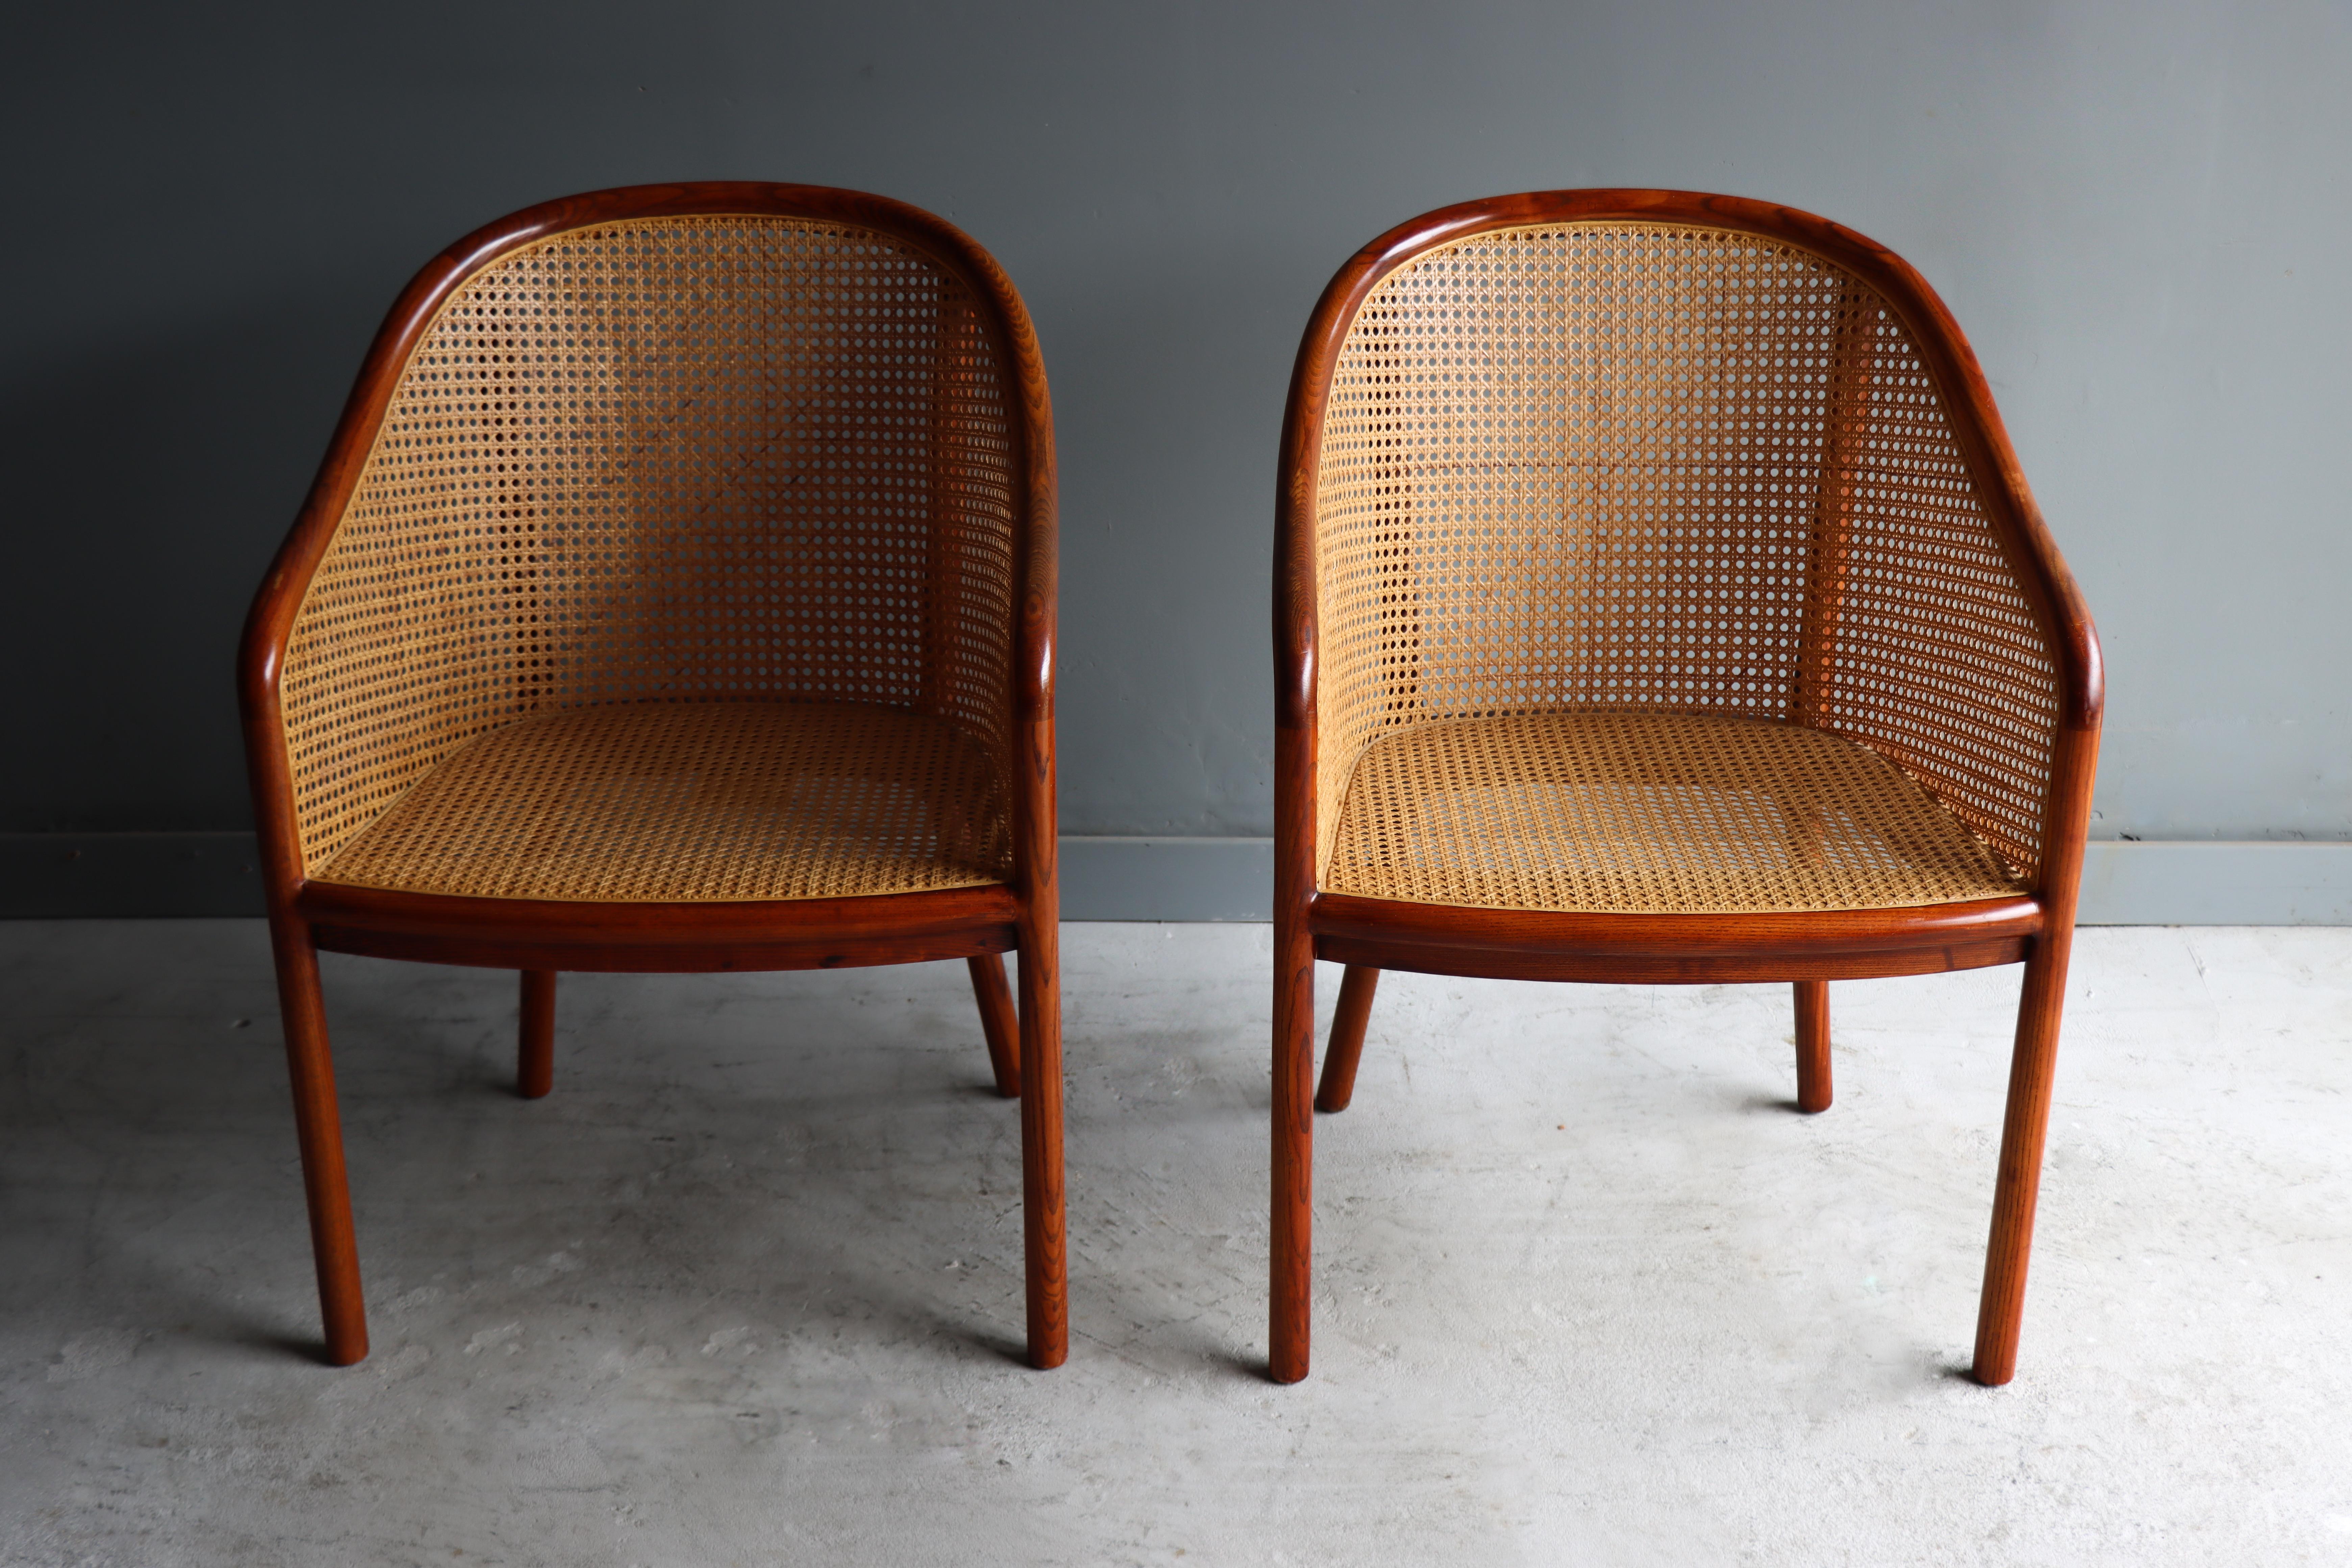 Vintage Pair of ‘Landmark’ Cane Chairs by Ward Bennett for Brickel, 1970, Mohair For Sale 10